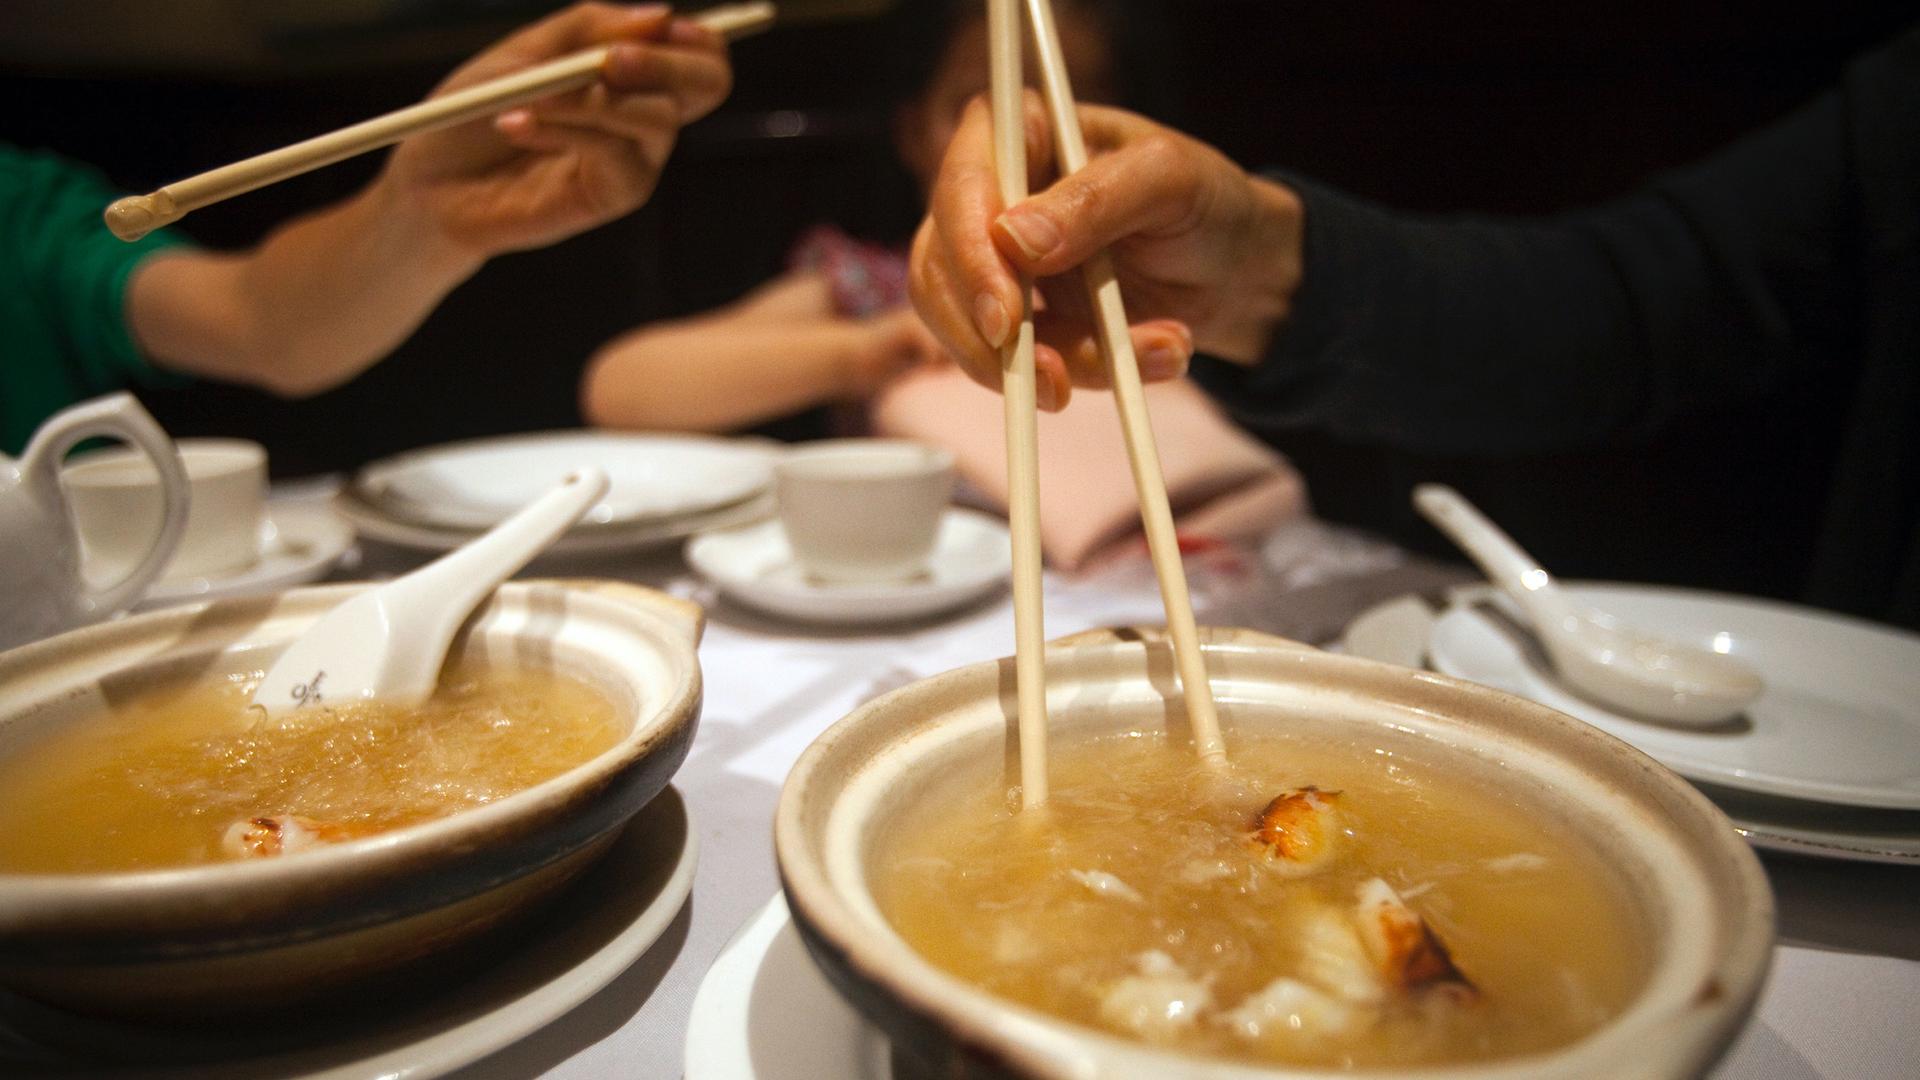 Two people eat with chopsticks at a restaurant